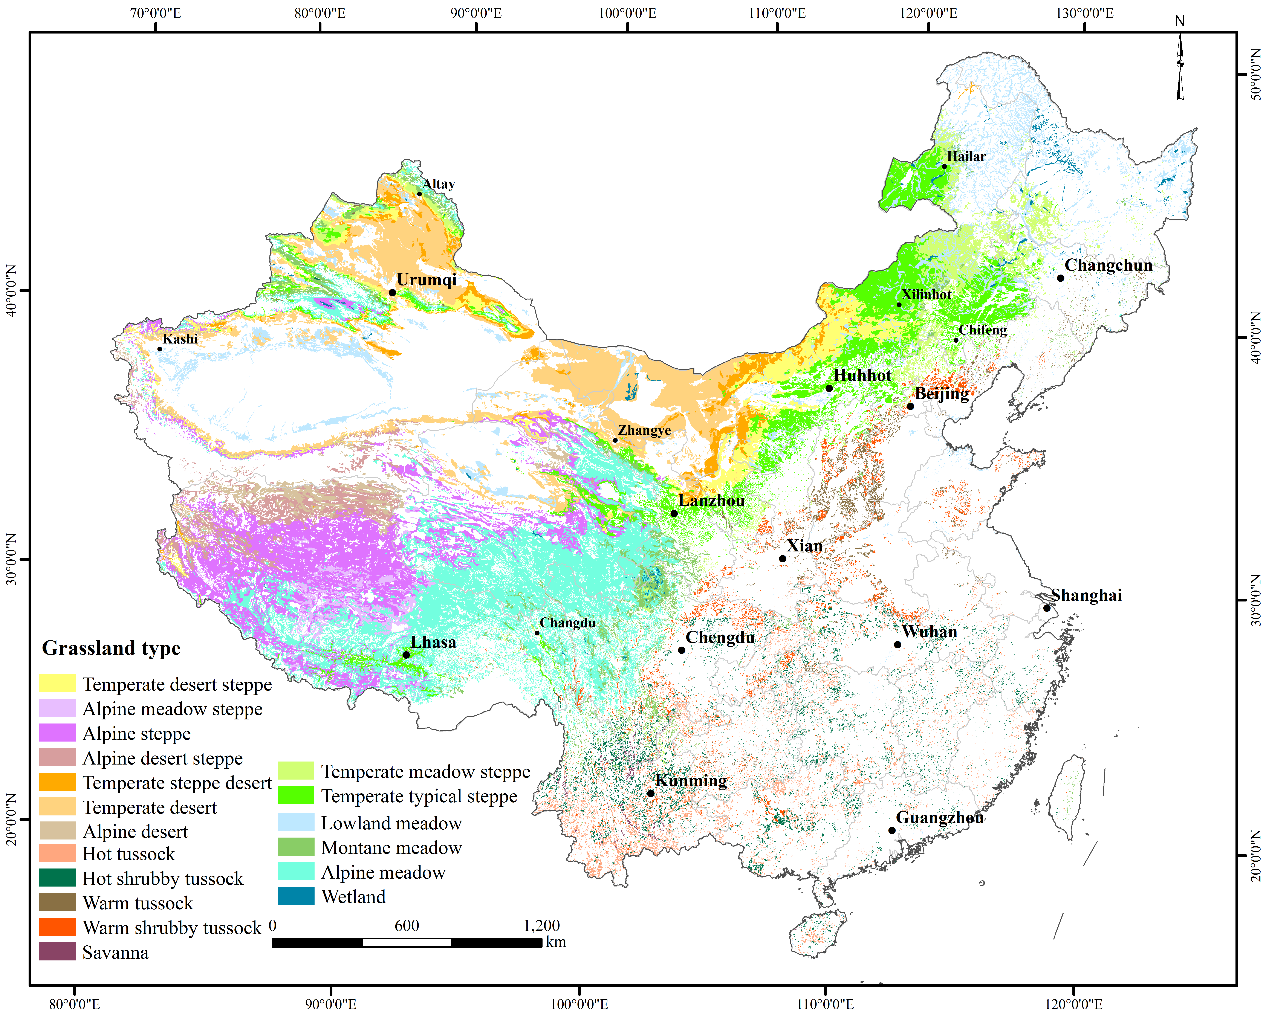 Map of China's grassland types (adapted from RRC)